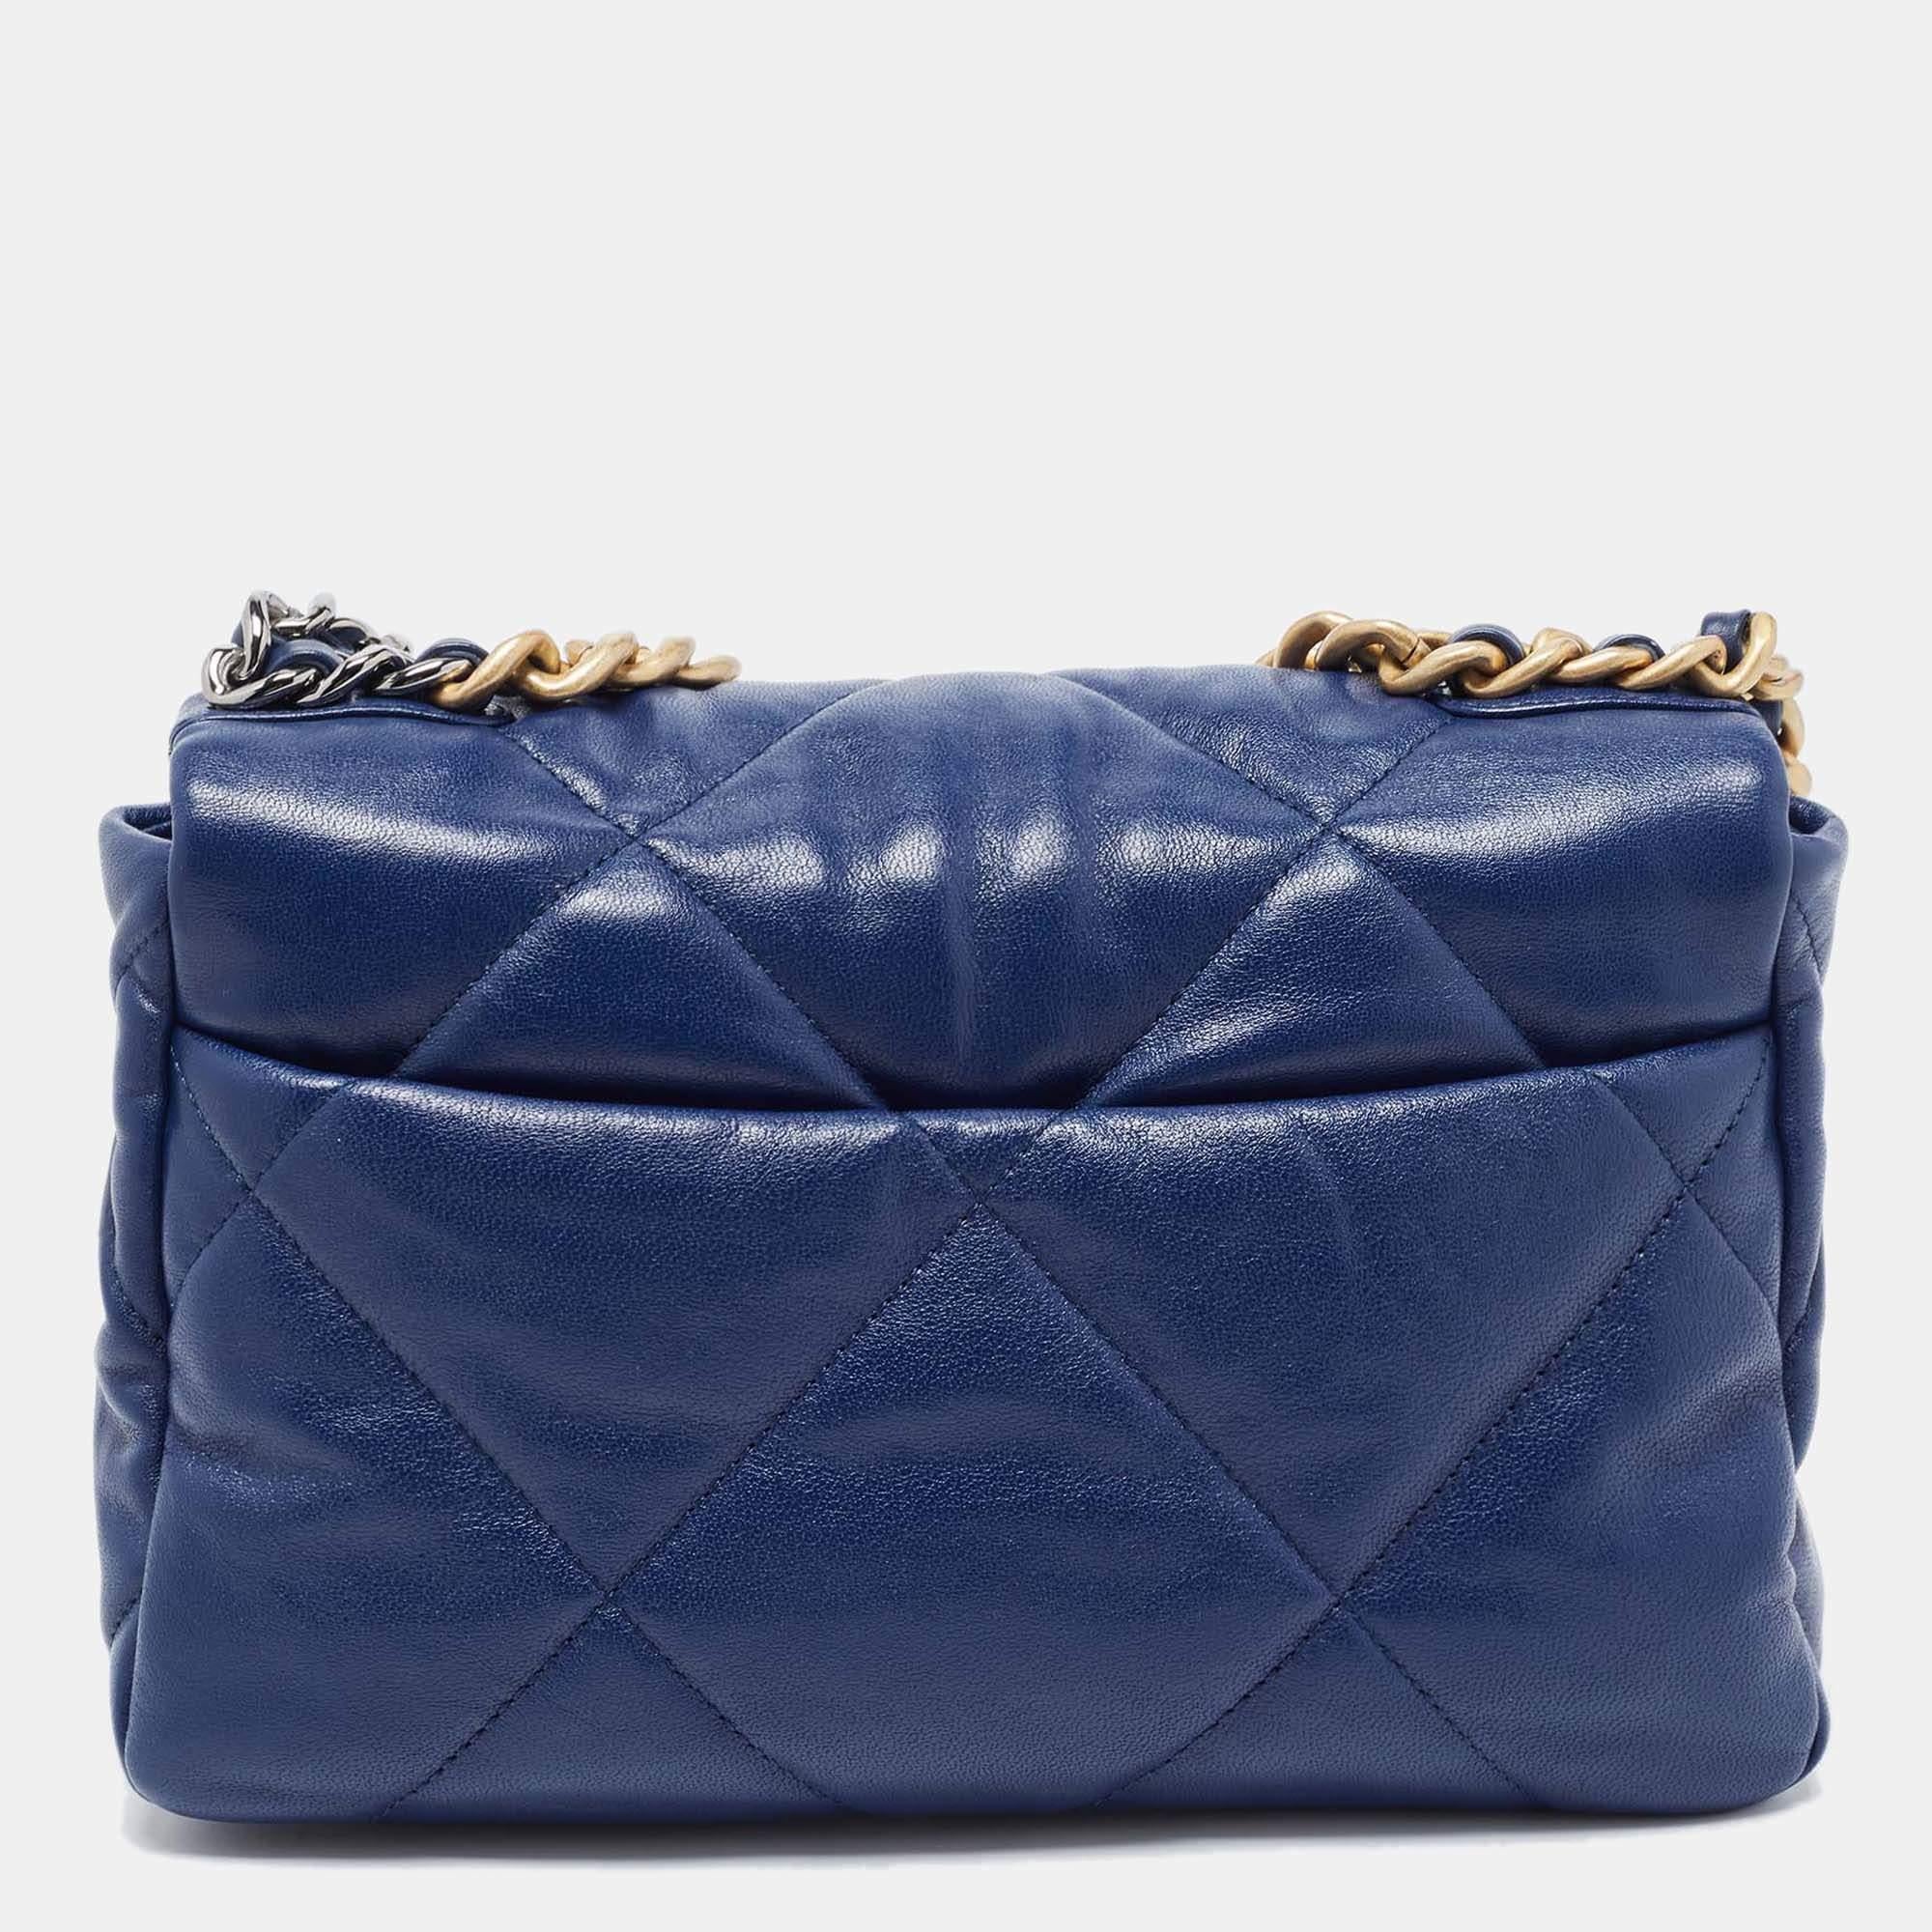 Chanel Blue Quilted Leather Medium 19 Flap Bag For Sale 8